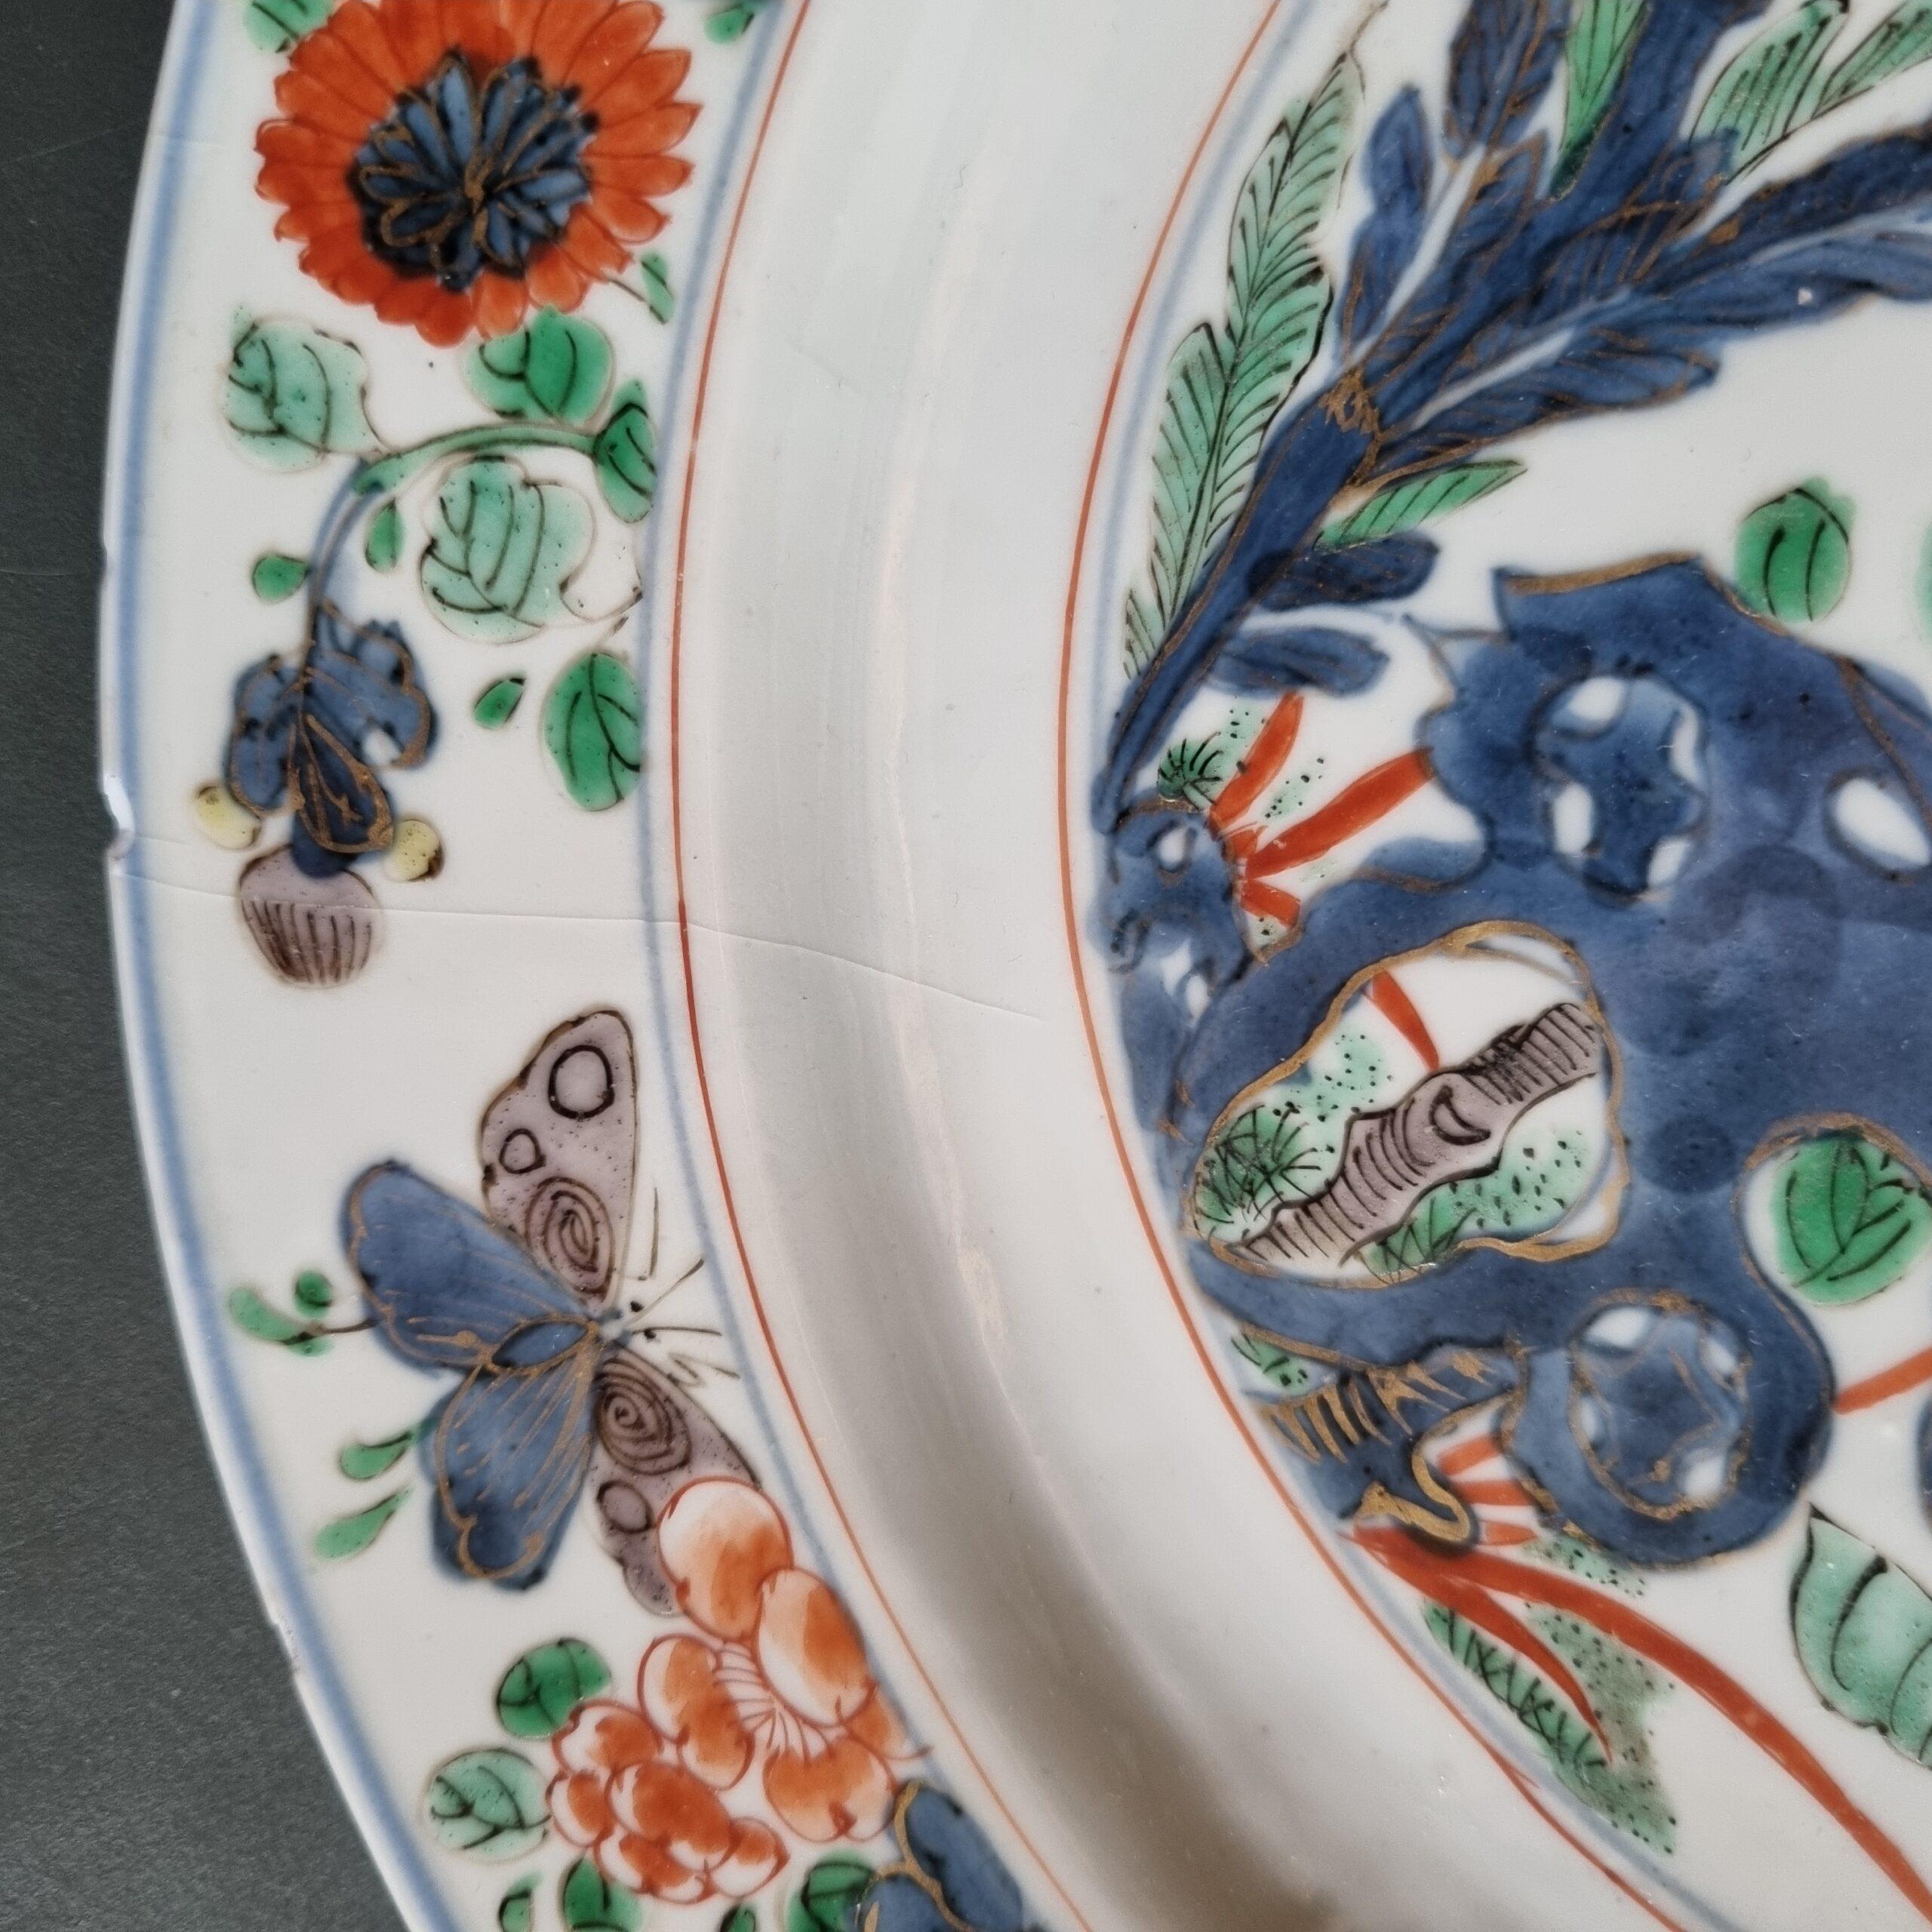 Quality Kangxi Period Chinese Porcelain Famille Verte Plate China, 18th Century In Good Condition For Sale In Amsterdam, Noord Holland